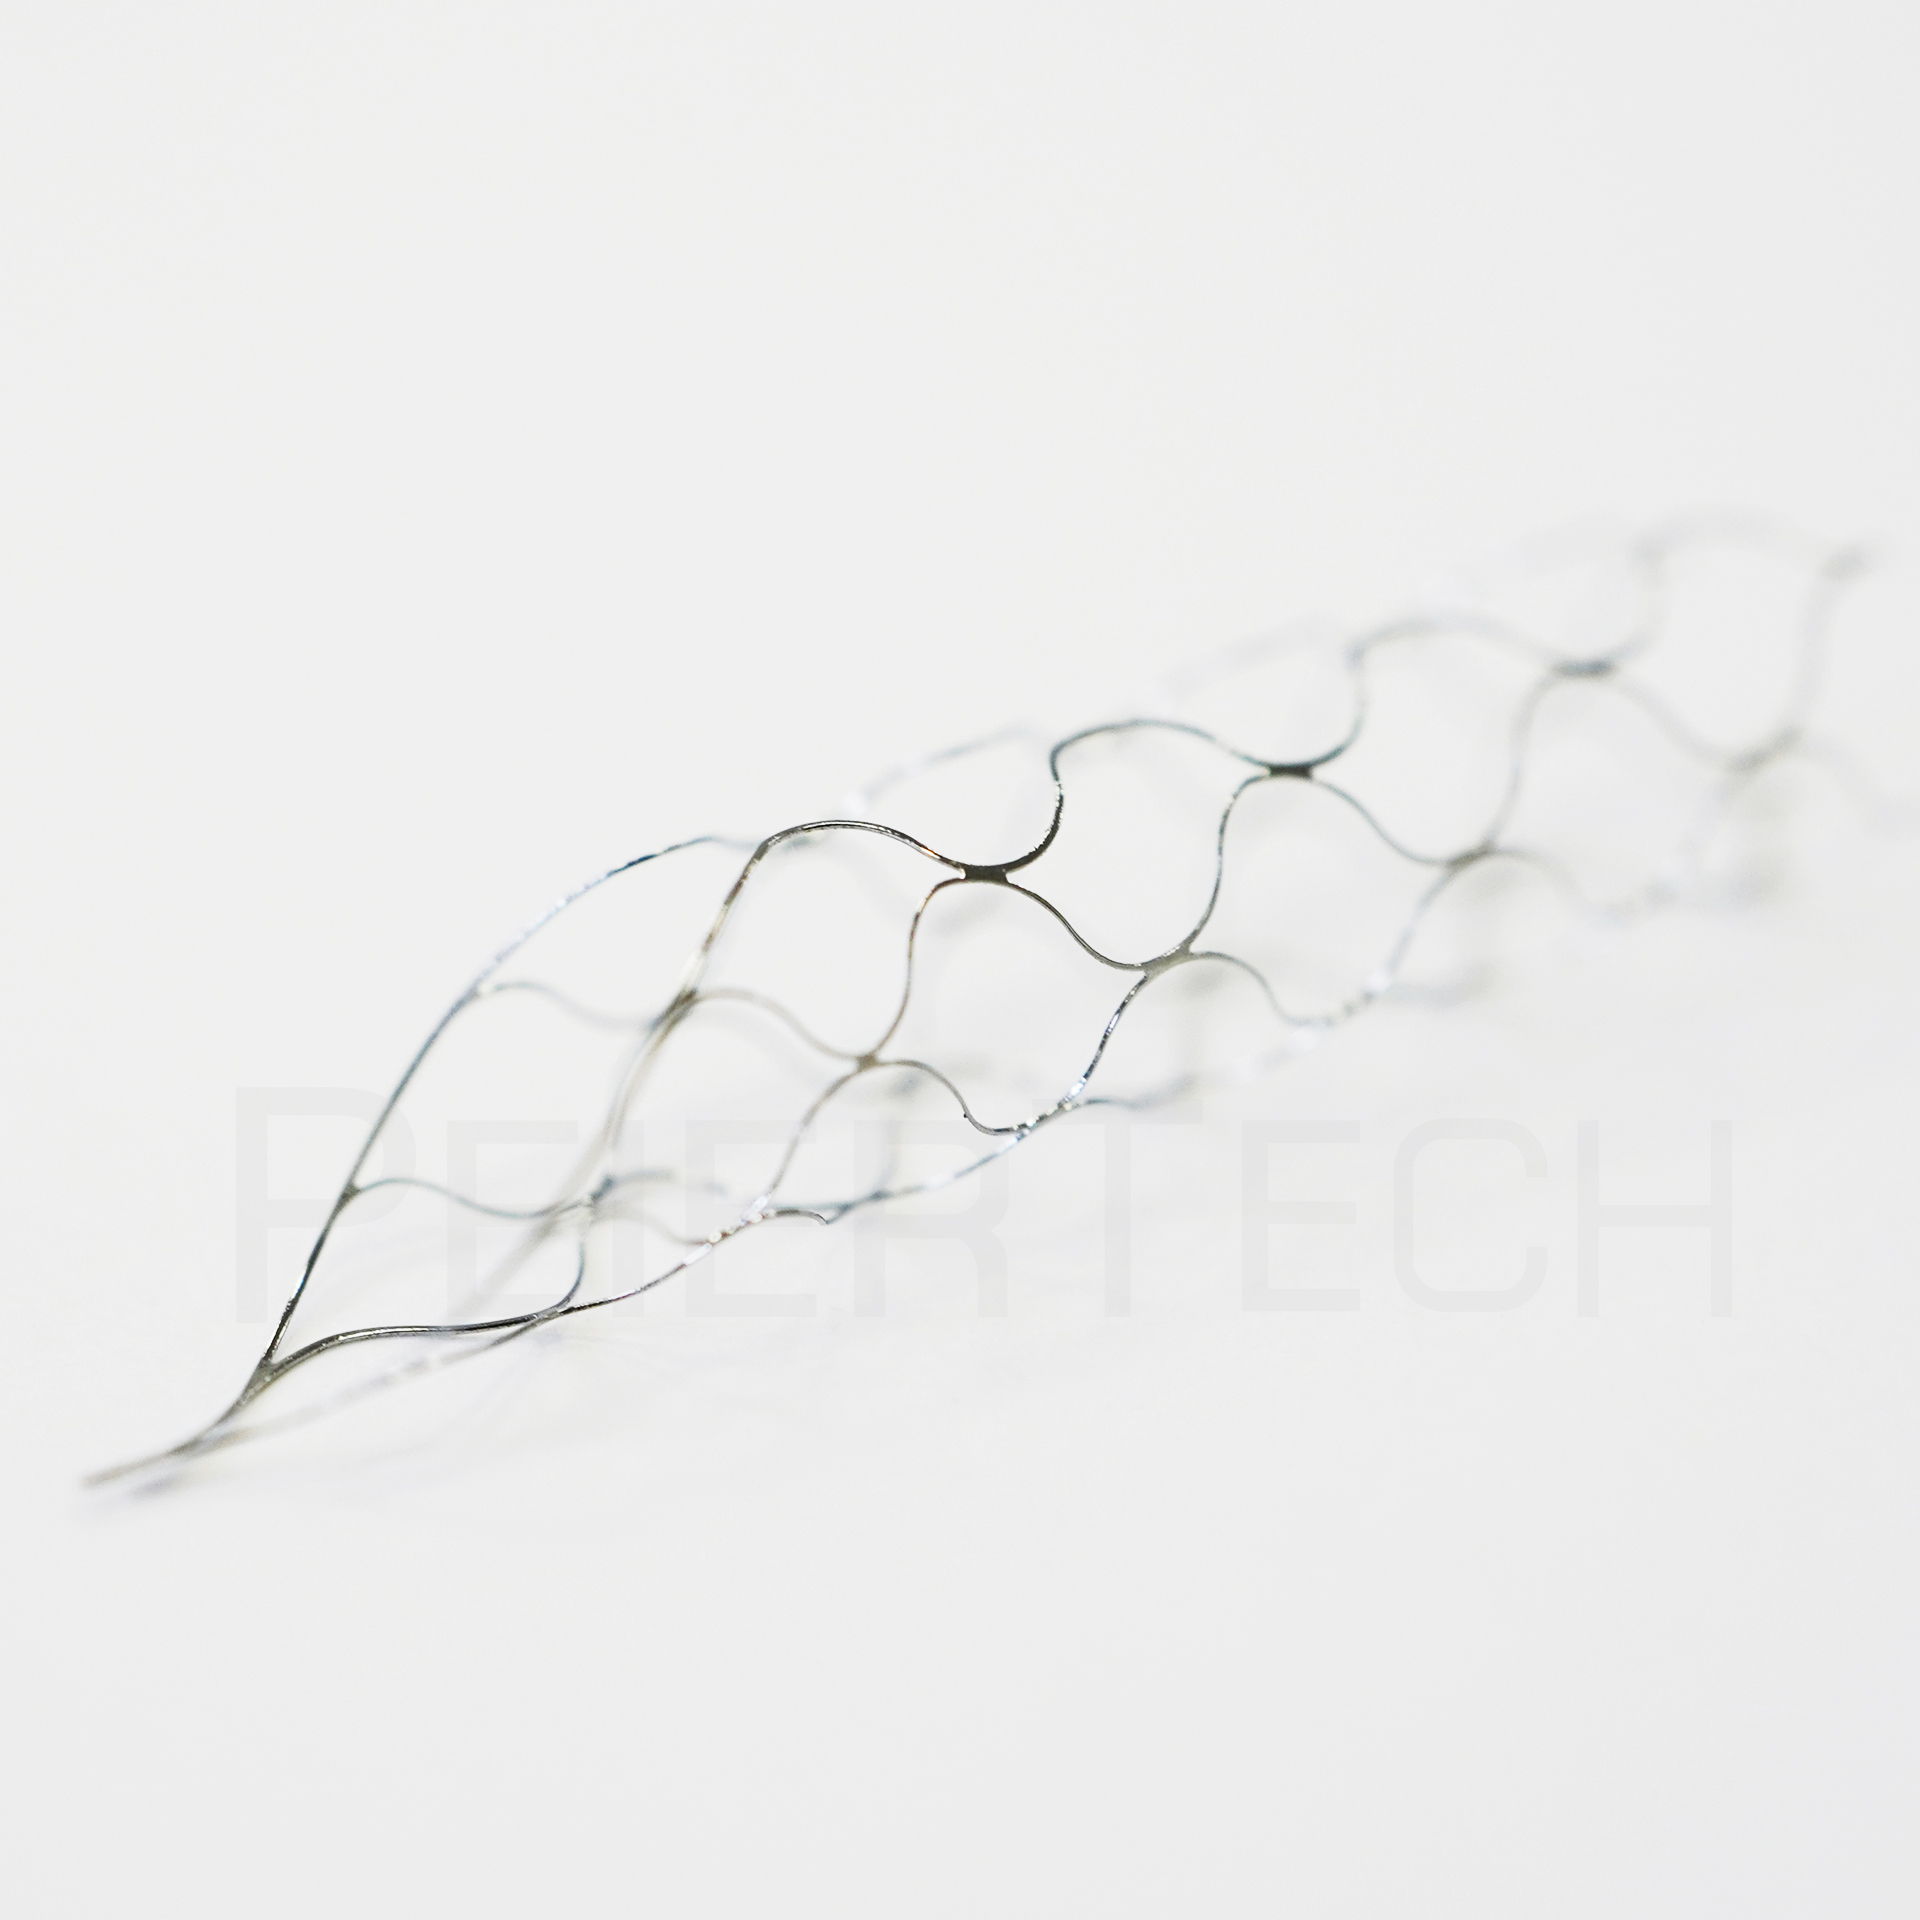 Precision Processing Stent Contract Manufacturing